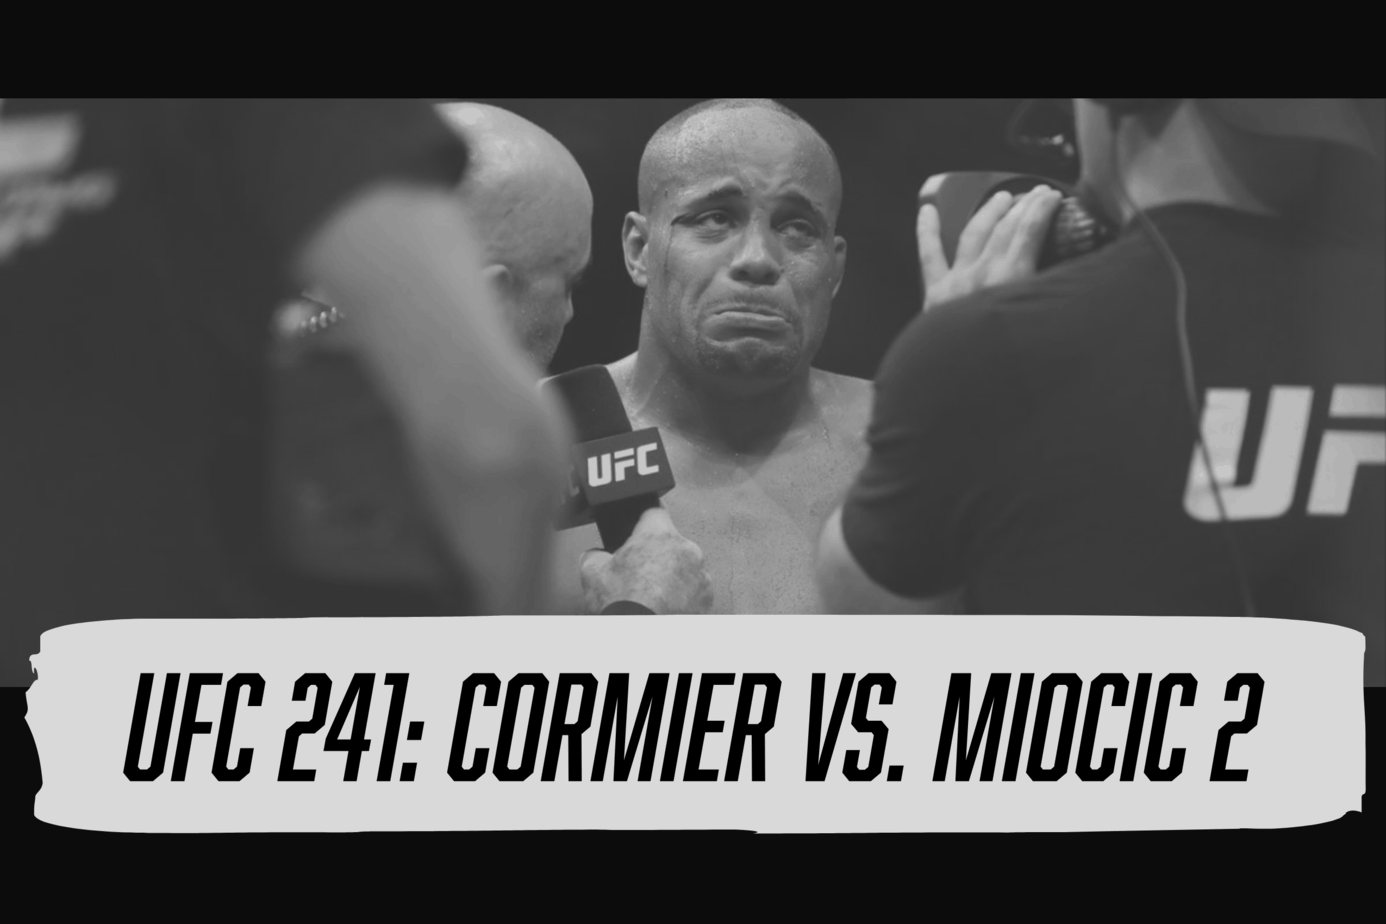 Josh Engleman breaks down UFC 241: Cormier vs. Miocic and gives out his Fantasy MMA DFS Picks for DraftKings and FanDuel.